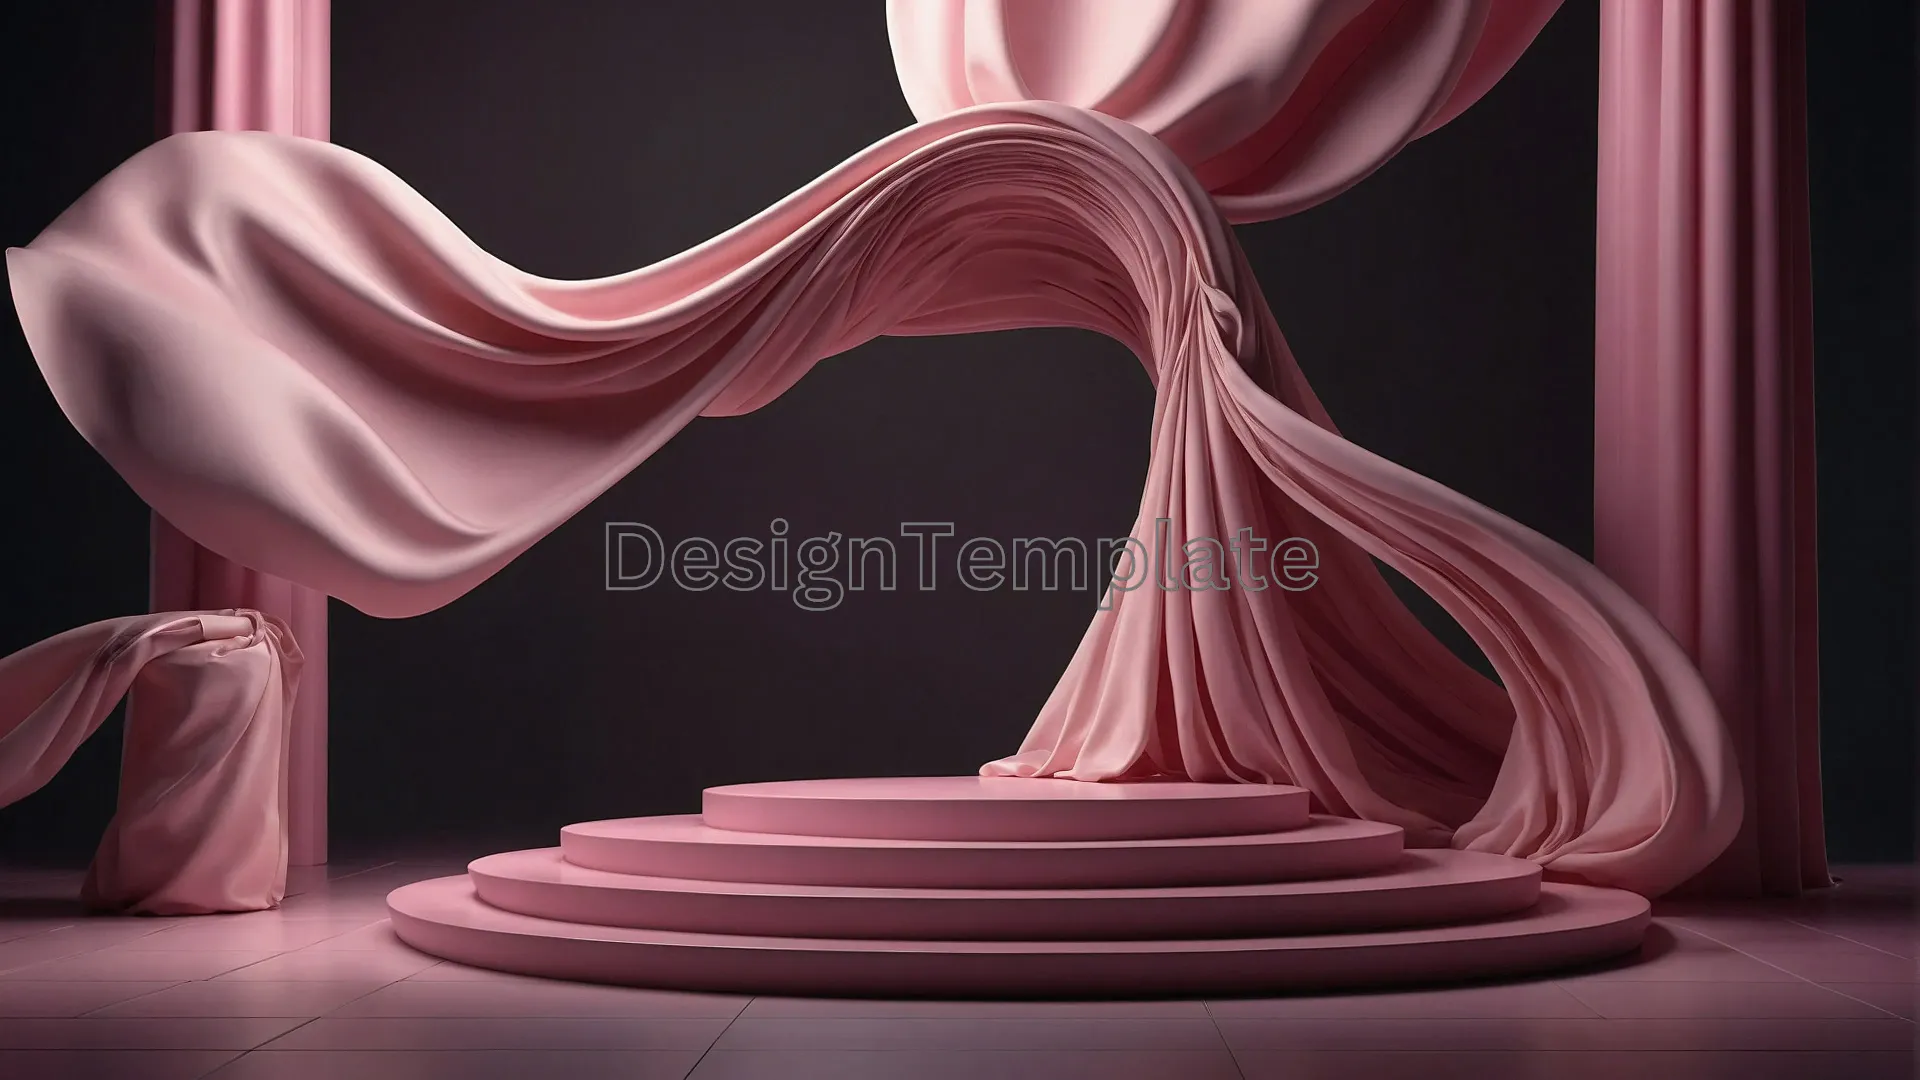 New 3D Podium with Draped Pink Cloth Image